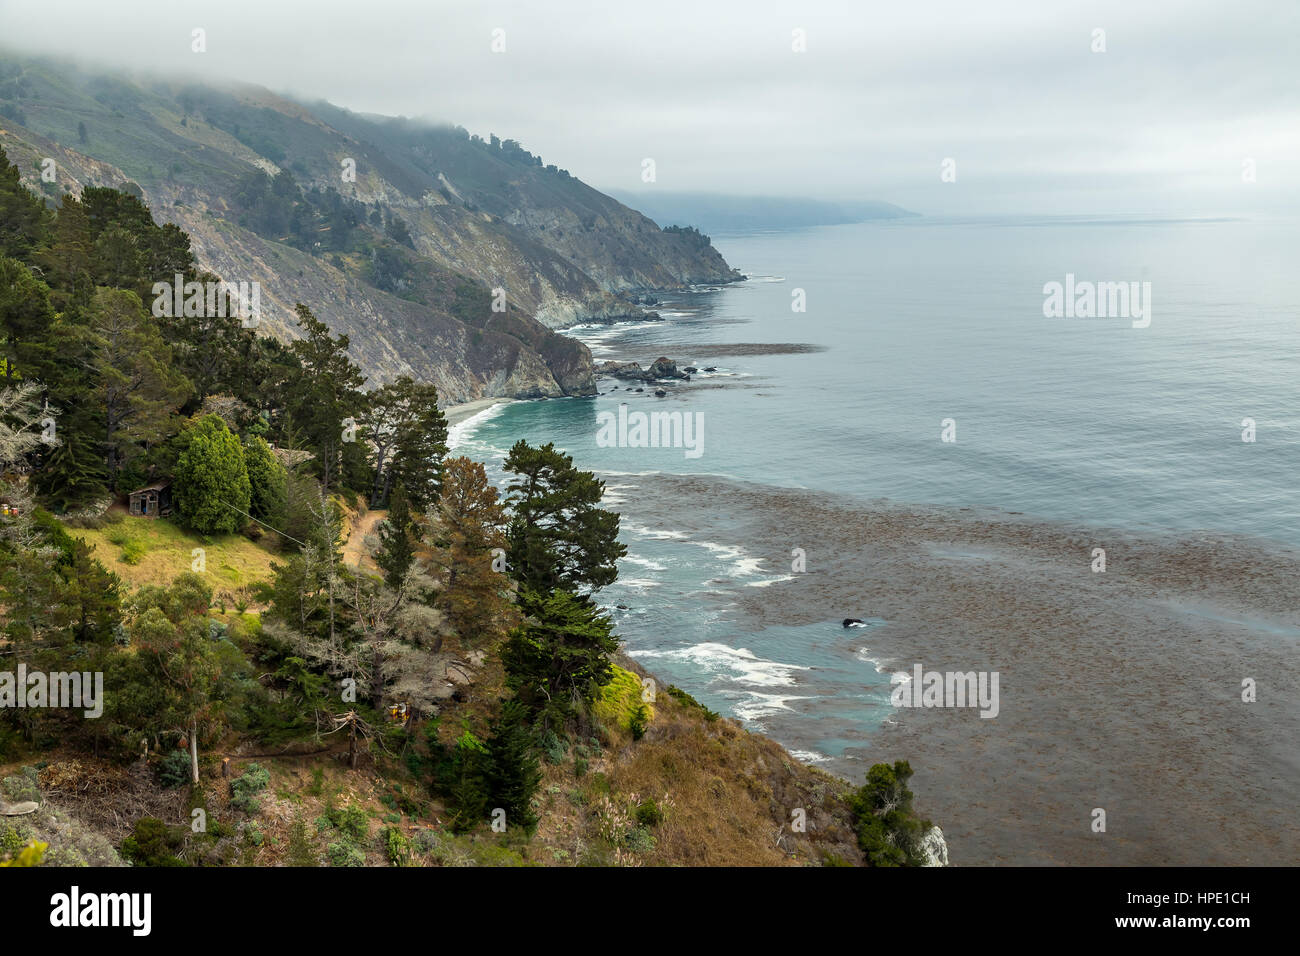 The Pacific Coast Highway (State Route 1) is a major north-south state highway that runs along most of the Pacific coastline of the U.S. state of Cali Stock Photo